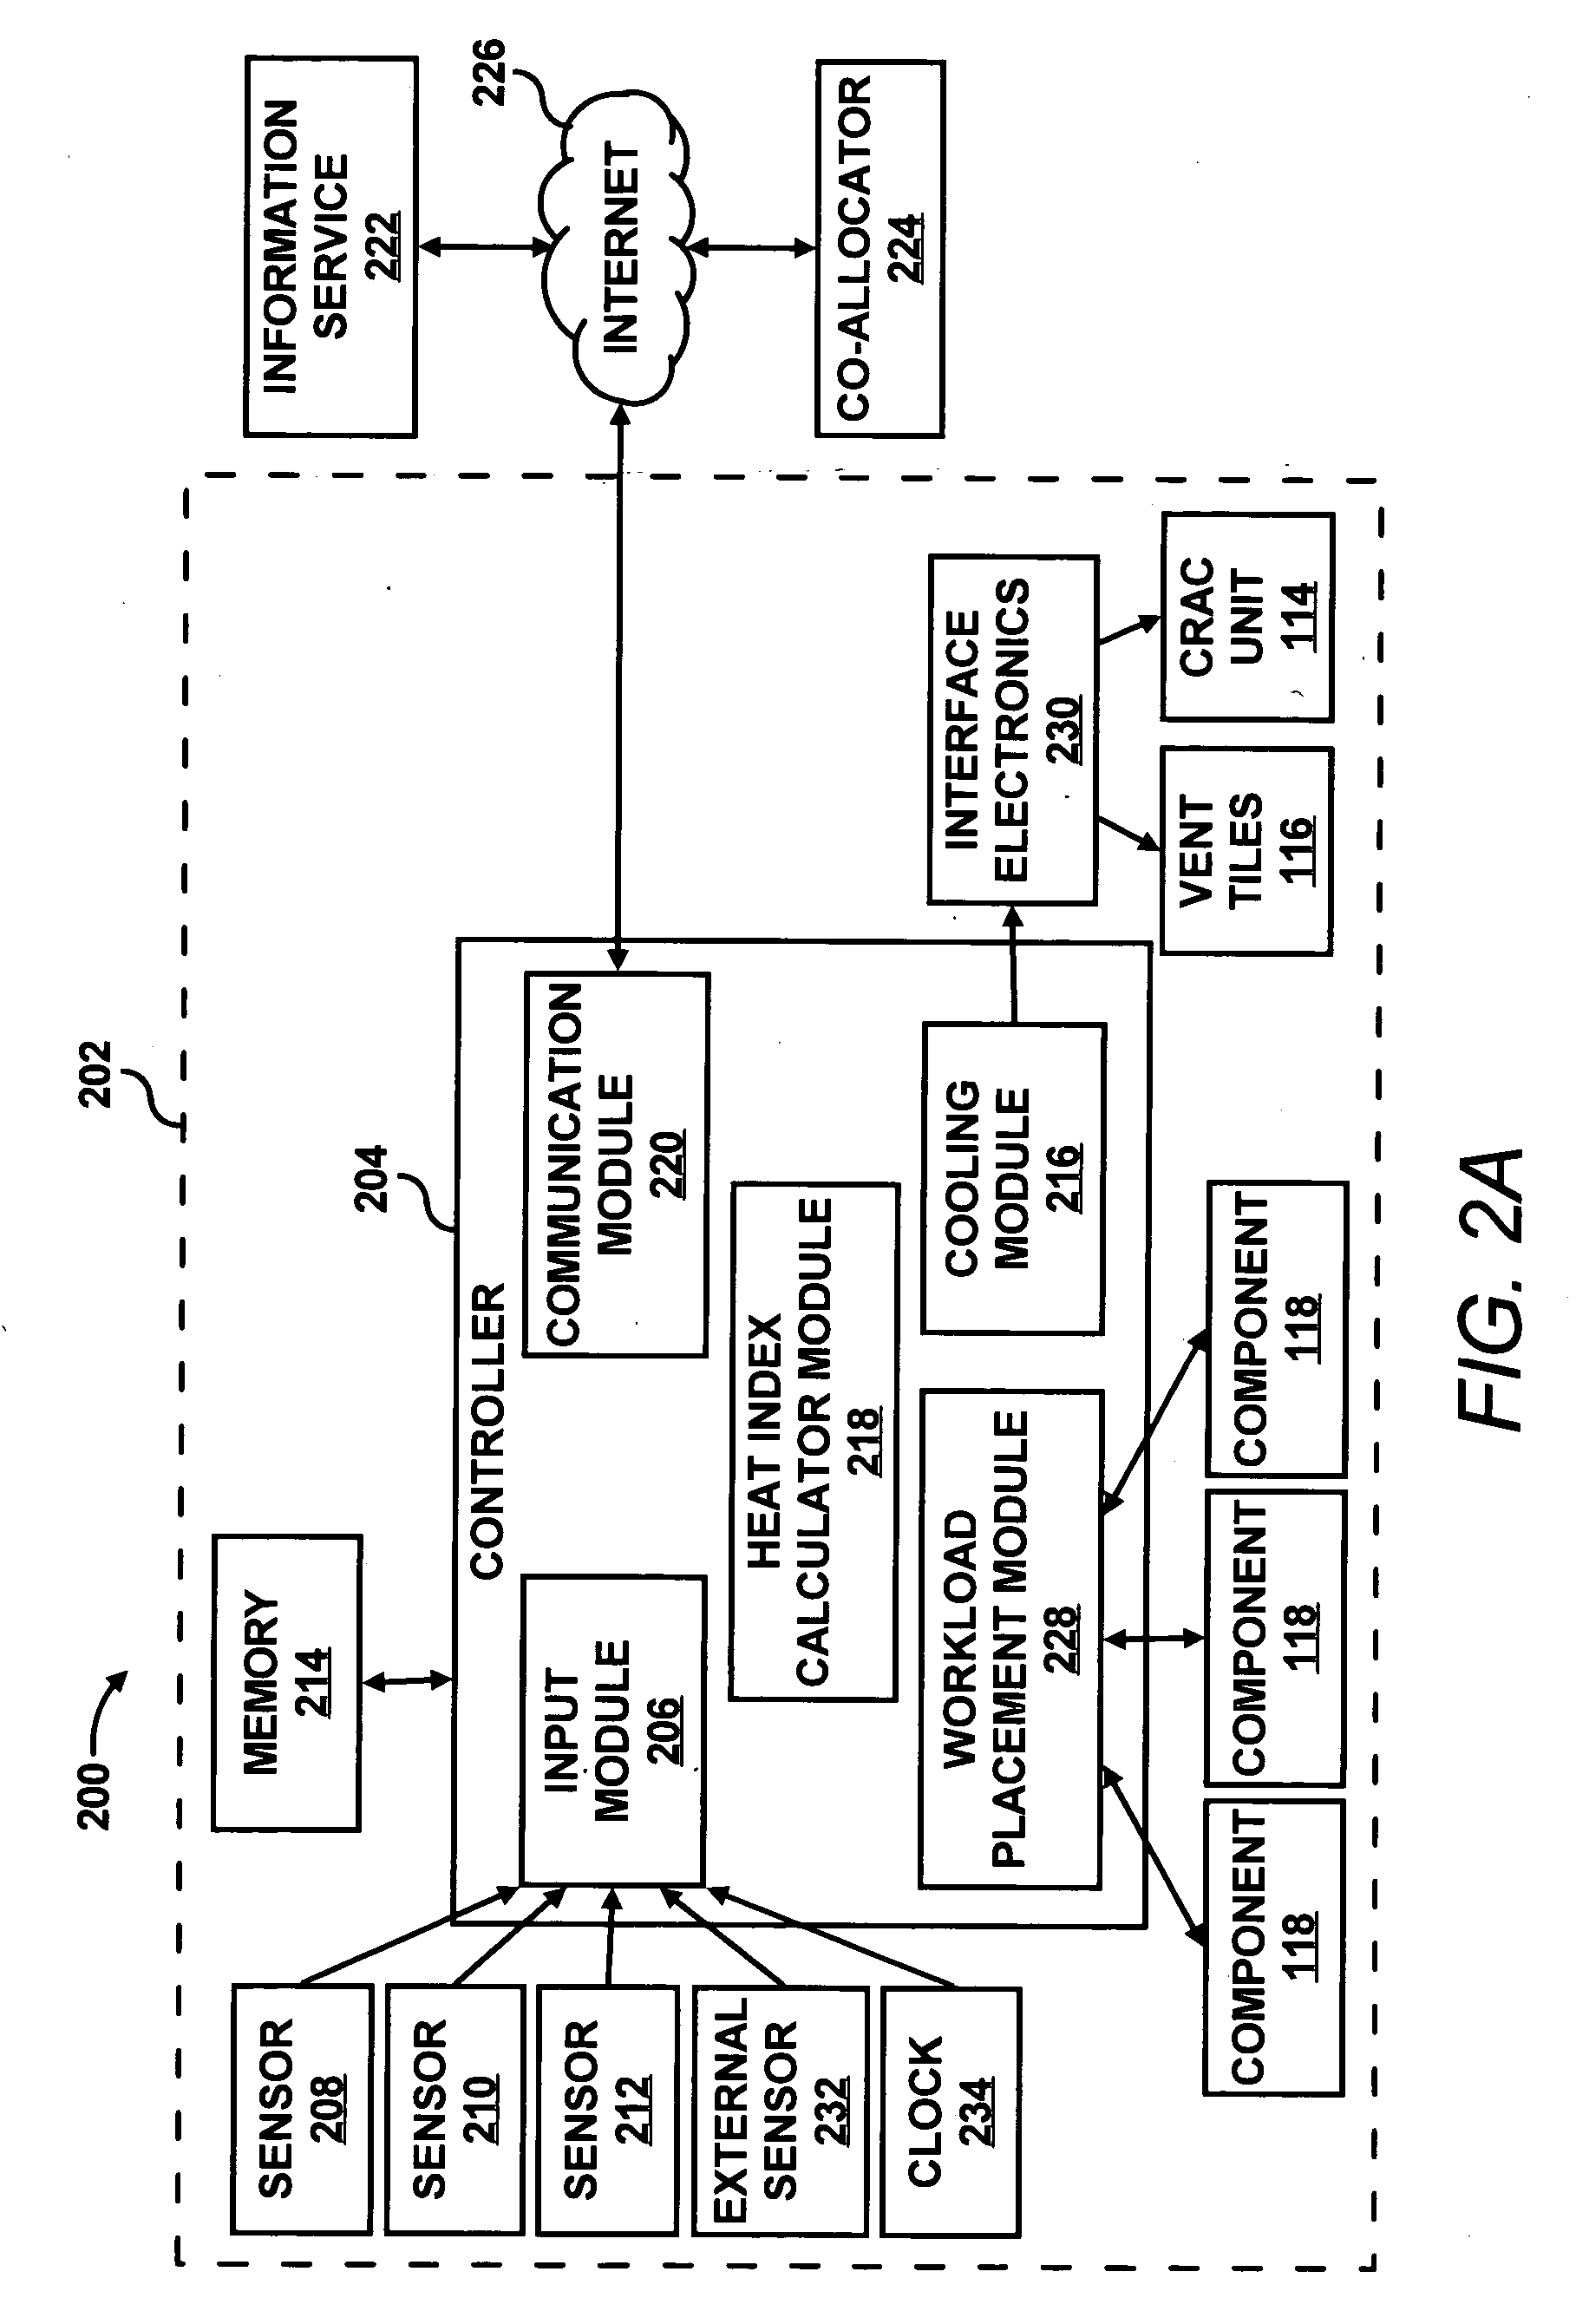 Workload placement among data centers based on thermal efficiency